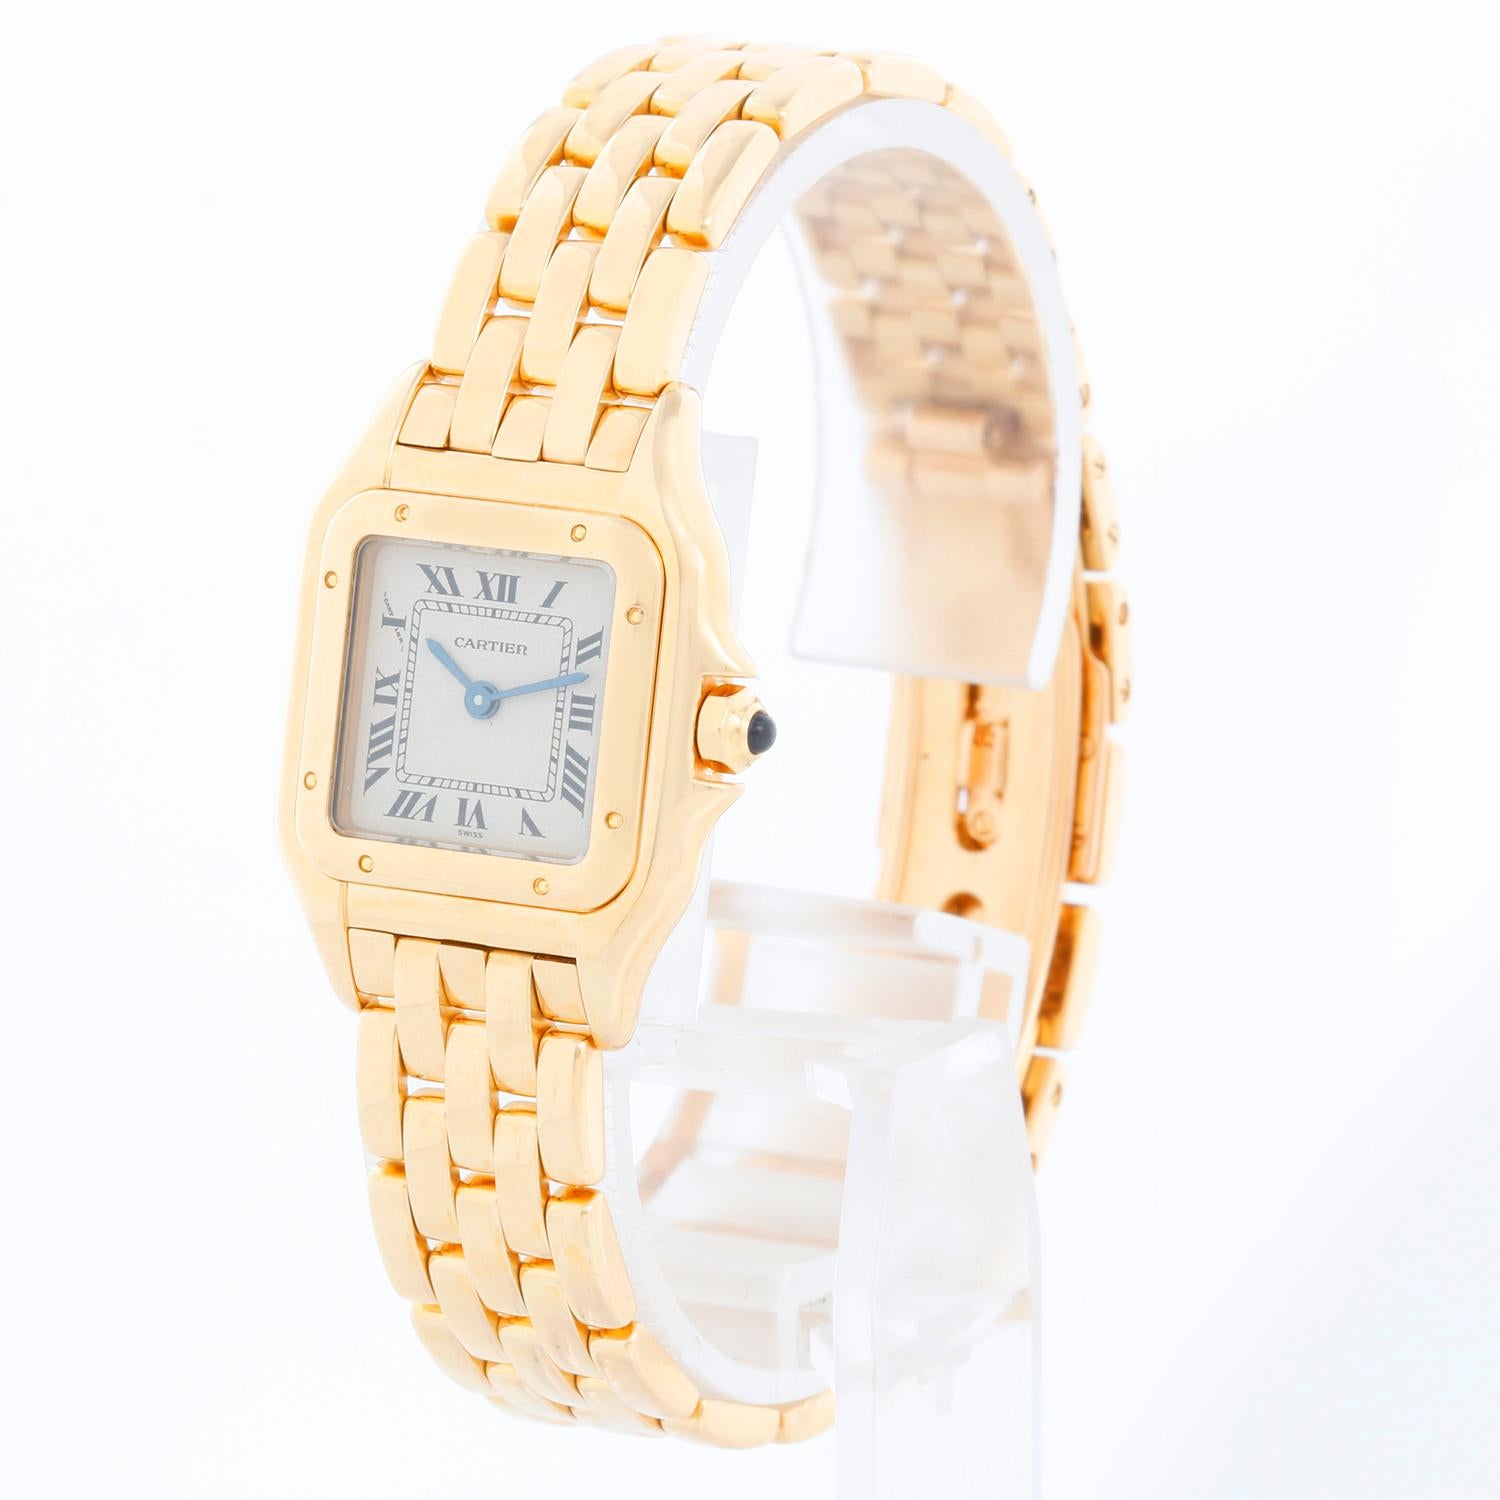 Cartier 18K Yellow Gold Panther Ladies Watch W25022B9 - Quartz. 18K Yellow Gold  (30 x 21 mm). Ivory dial with black Roman numerals. 18K Yellow Gold Panthere bracelet. Pre-owned  with Cartier box and papers .